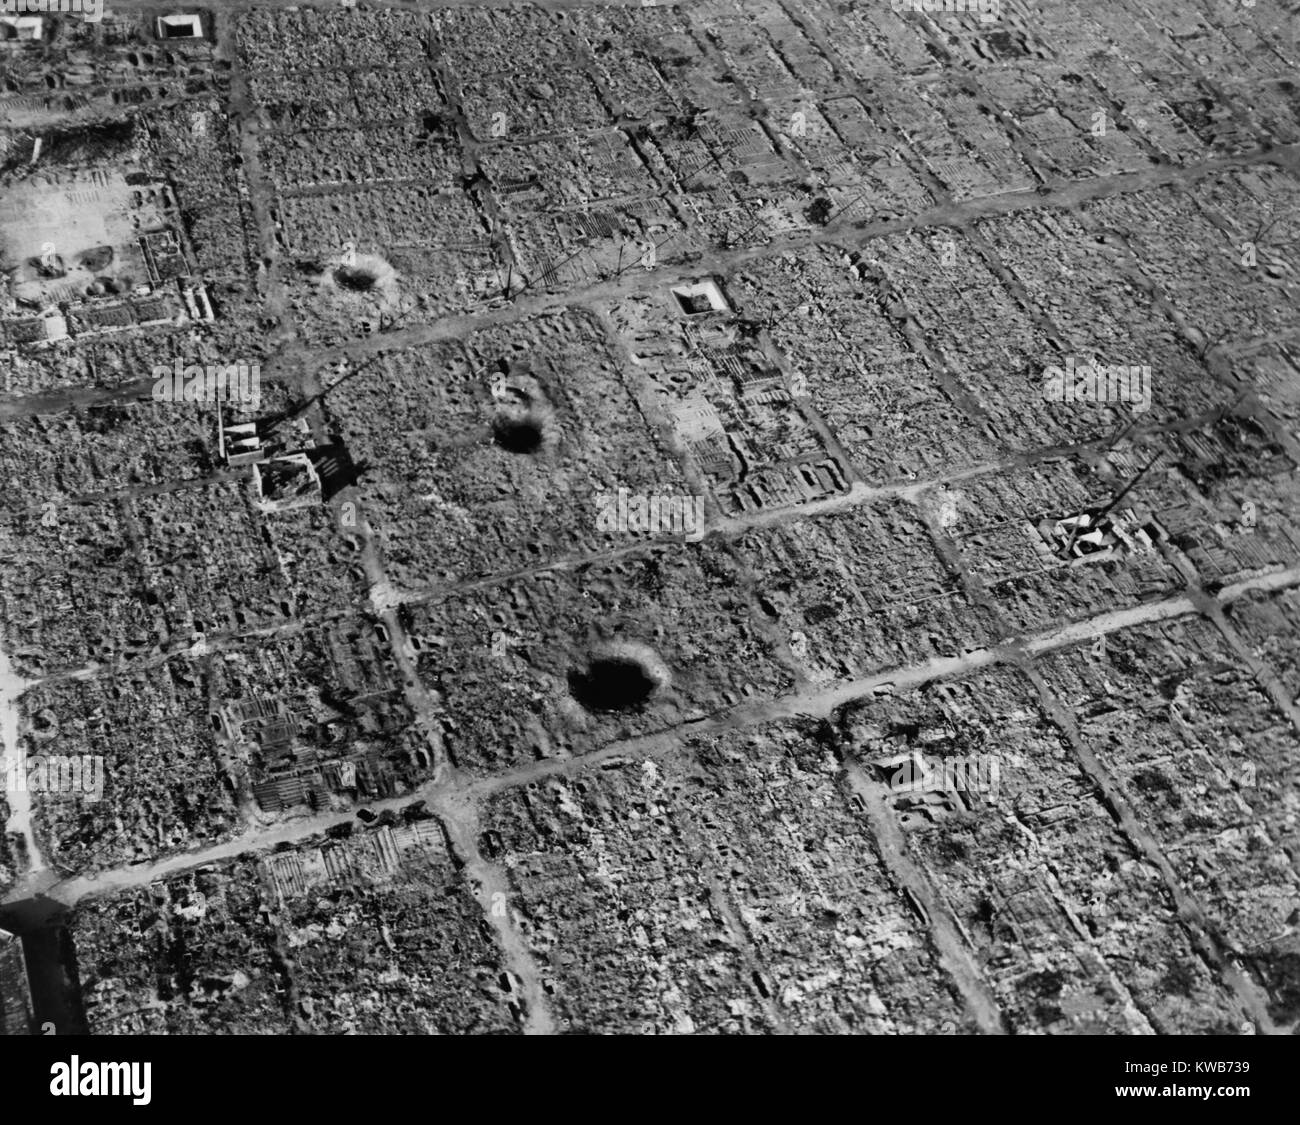 Aerial view of Osaka, Japan, after firebombing by U.S. incendiary bombs. The city suffered three bombing campaigns by B-29 Superfortresses from March to August 1945. The last occurred on Aug. 14, five days after the Atomic bombing of Nagasaki. World War 2. (BSLOC 2014 10 116) Stock Photo